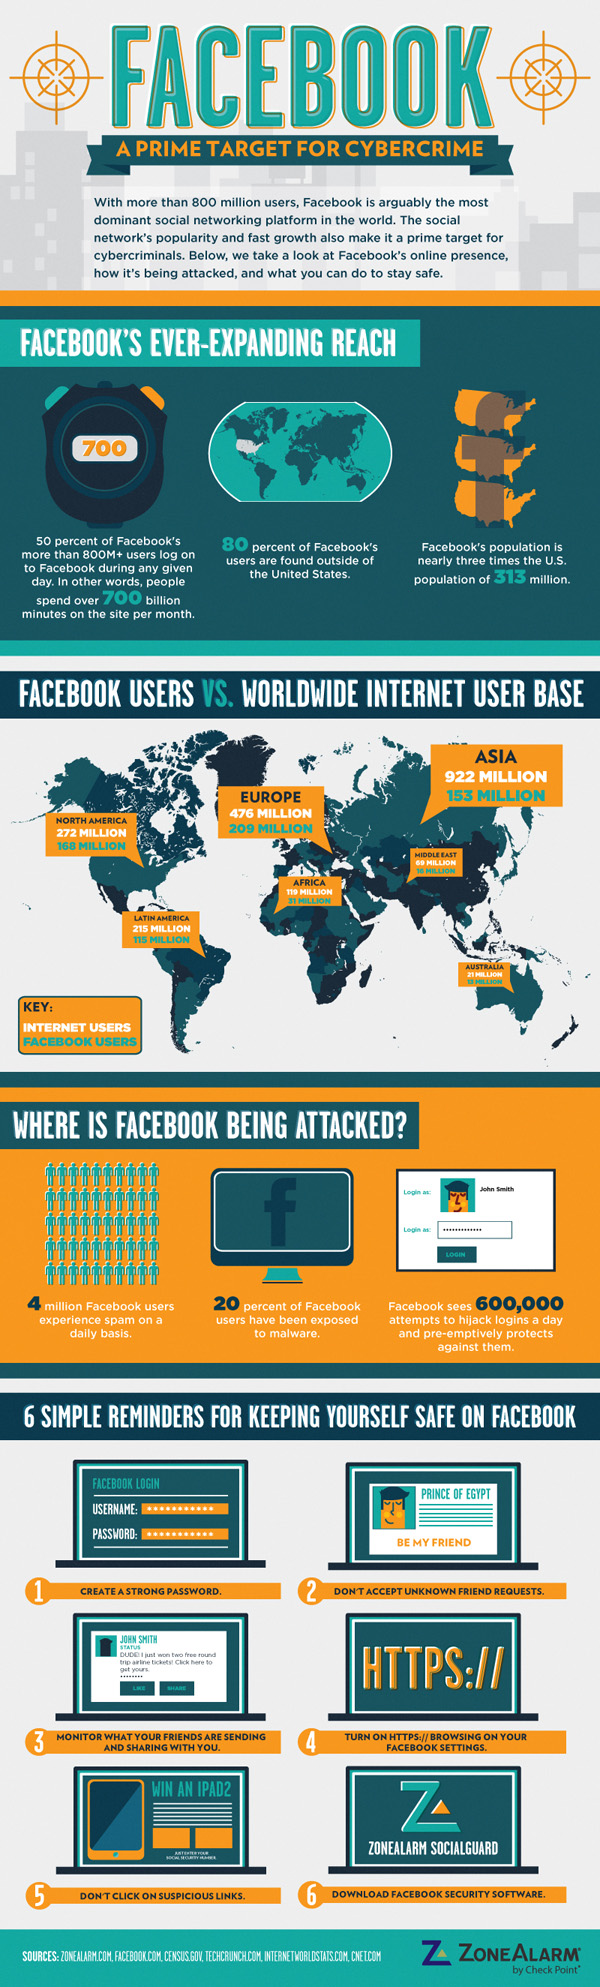 [Infographic] Facebook's Huge Crowd, How It's Attacked & How You Can Stay Safe